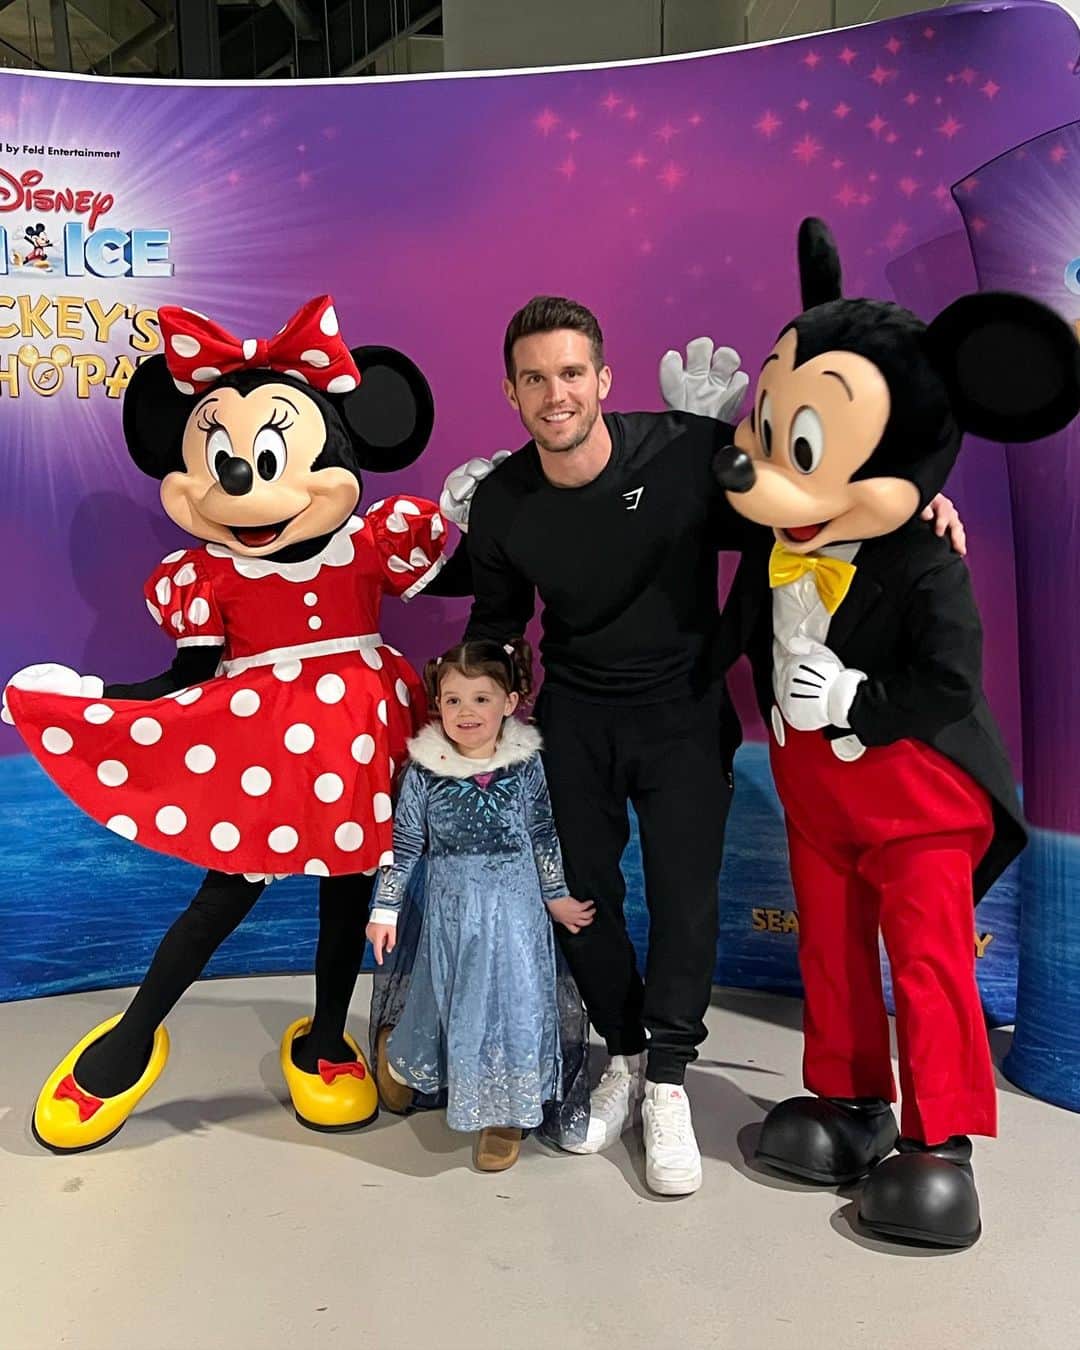 GazGShoreのインスタグラム：「HAHA Probs done 1000’s of PAs and meet and greets back in the day half of you on here i have probs met/got a picture with 😂 how times have changed now i am in the line waiting for a picture with bloody Mickey and minnie 😂😂😂😂 Primrose loved it tho ❤️」